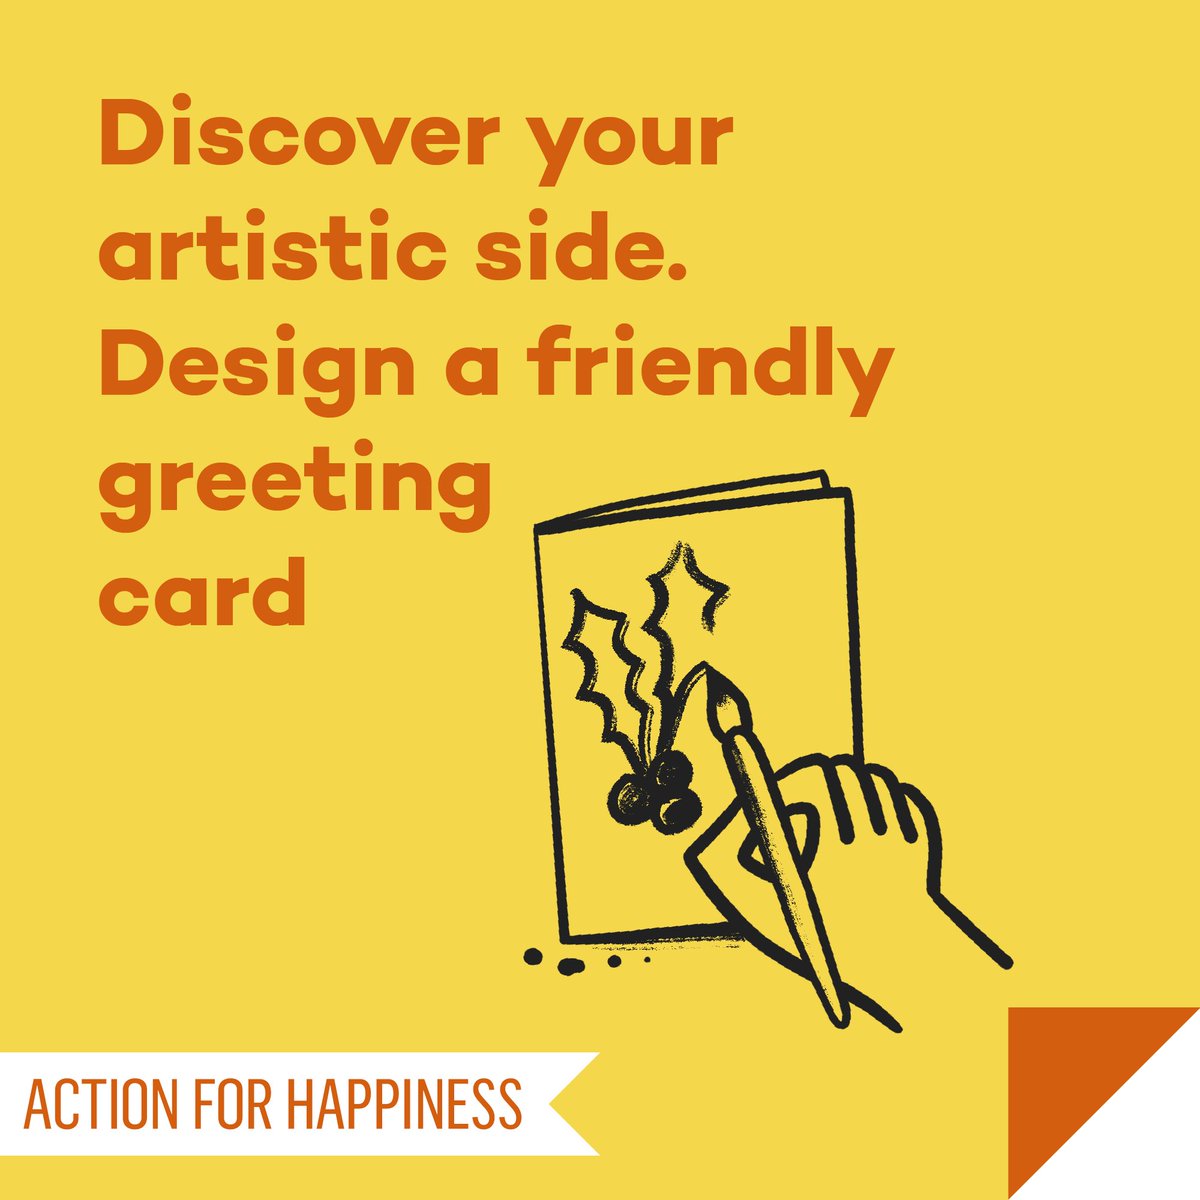 New Ways November - Day 28: Discover your artistic side. Design a friendly greeting card actionforhappiness.org/new-ways-novem… #NewWaysNovember